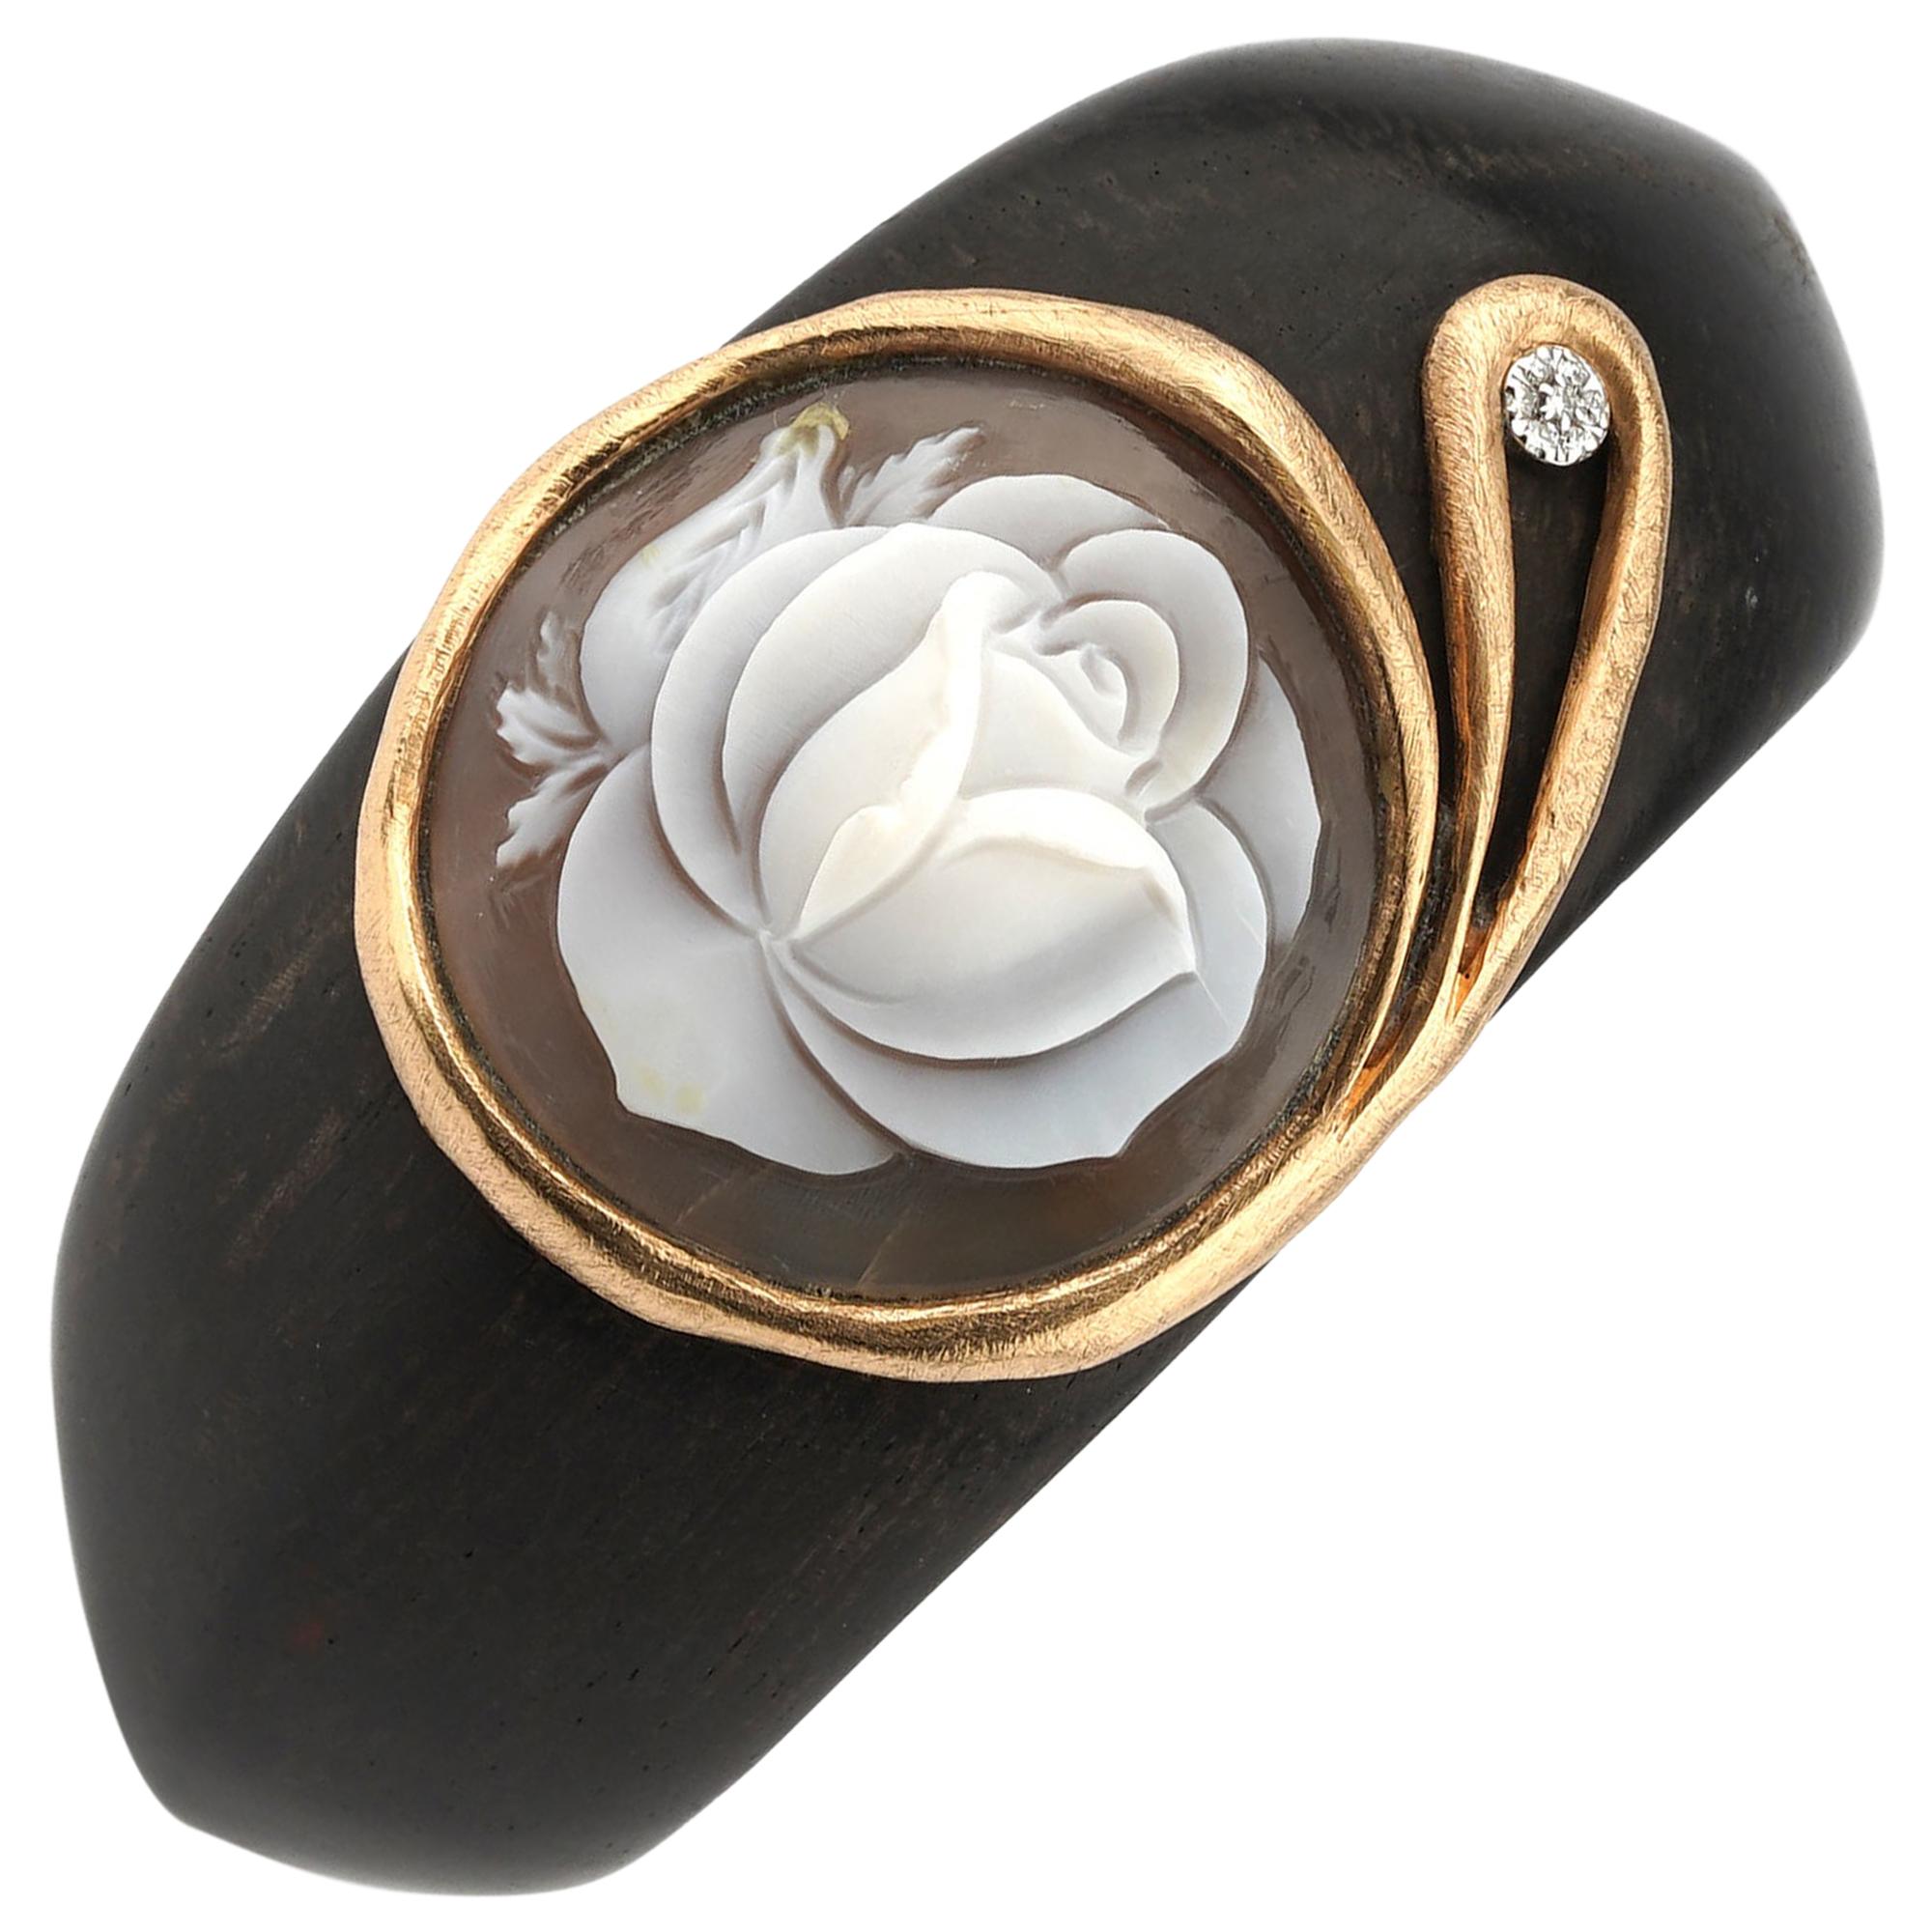 18 Carat Gold and Ebony Bracelet with Diamonds and Rose Carving Cameo For Sale